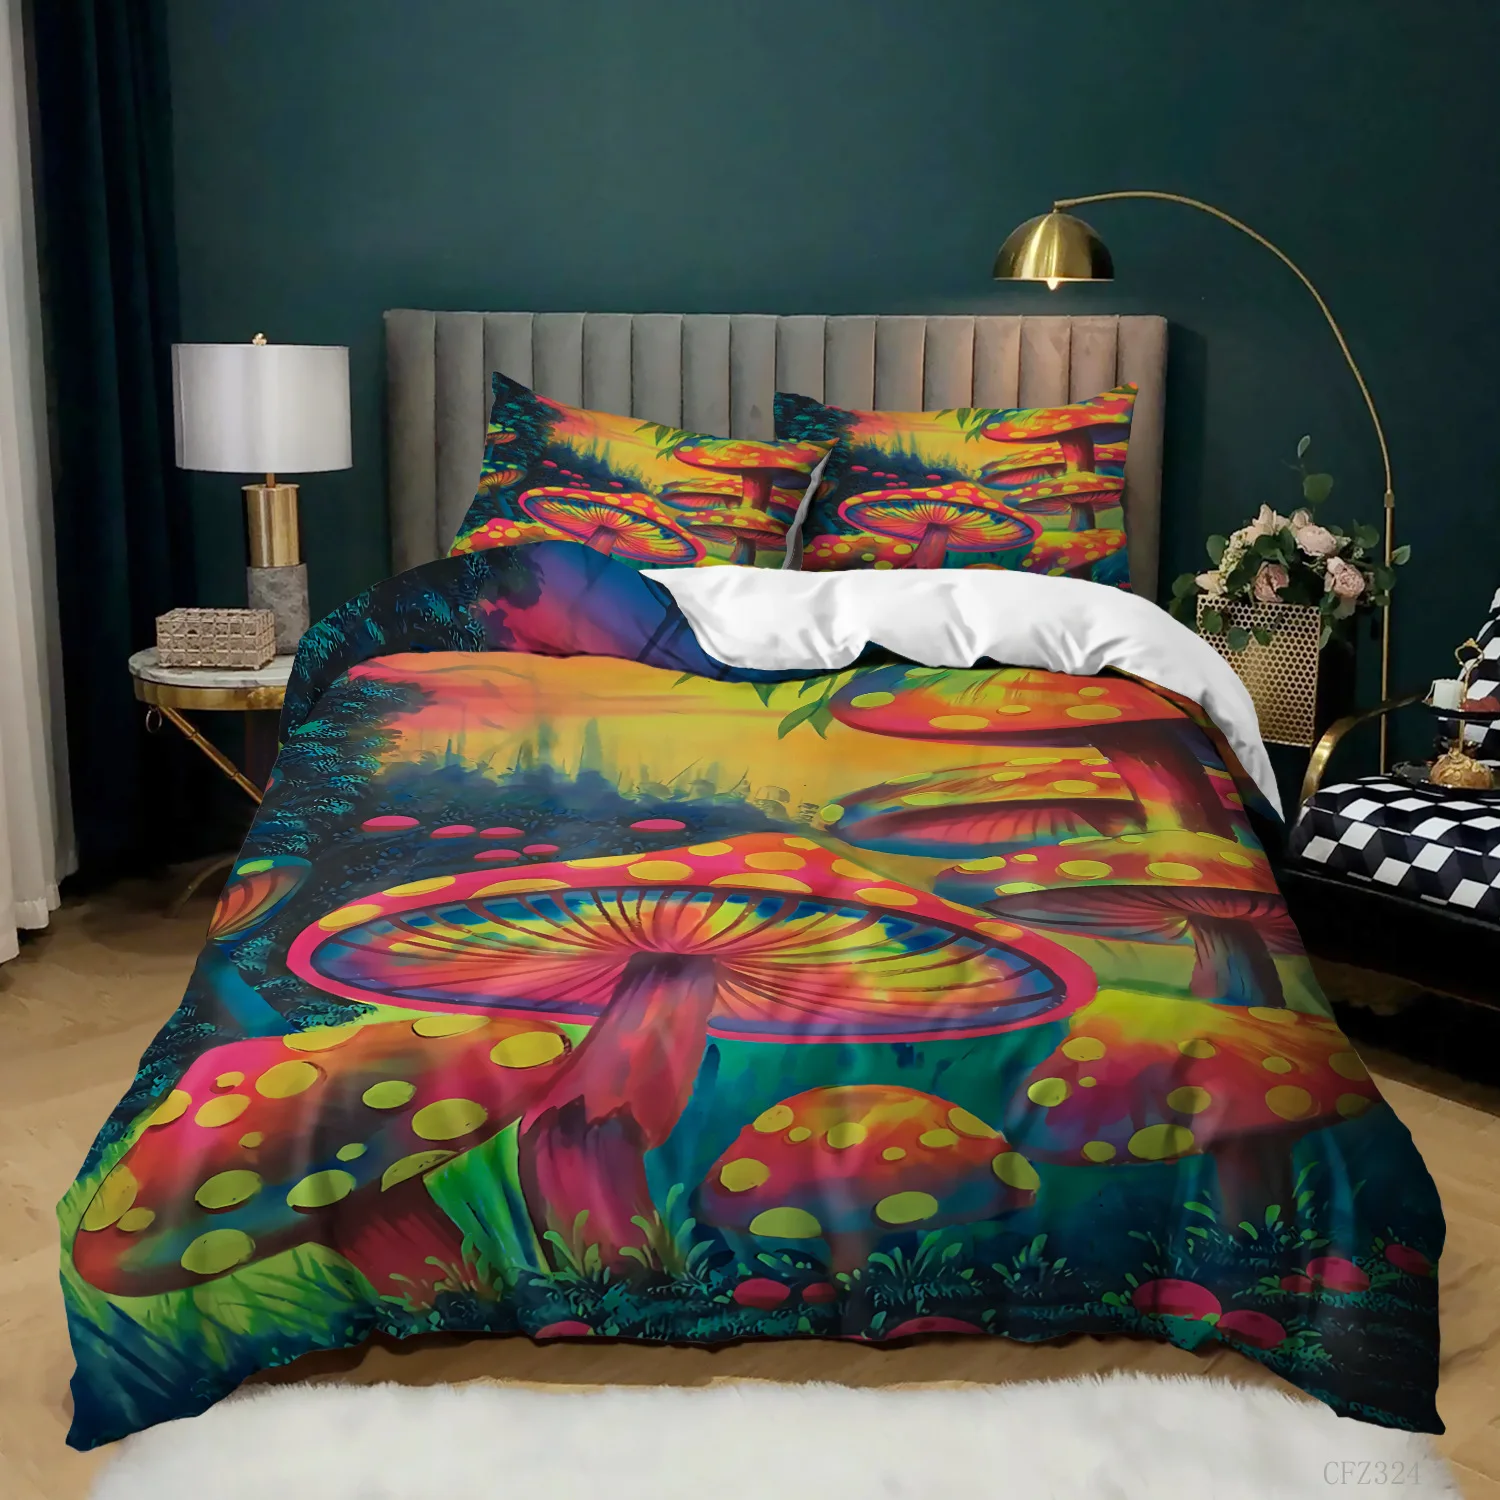 

Mushroom Duvet Cover Magical Forest Colorful Cute Psychedelic Mushrooms Bedding Set For Kids Girls Boys, Multicolor